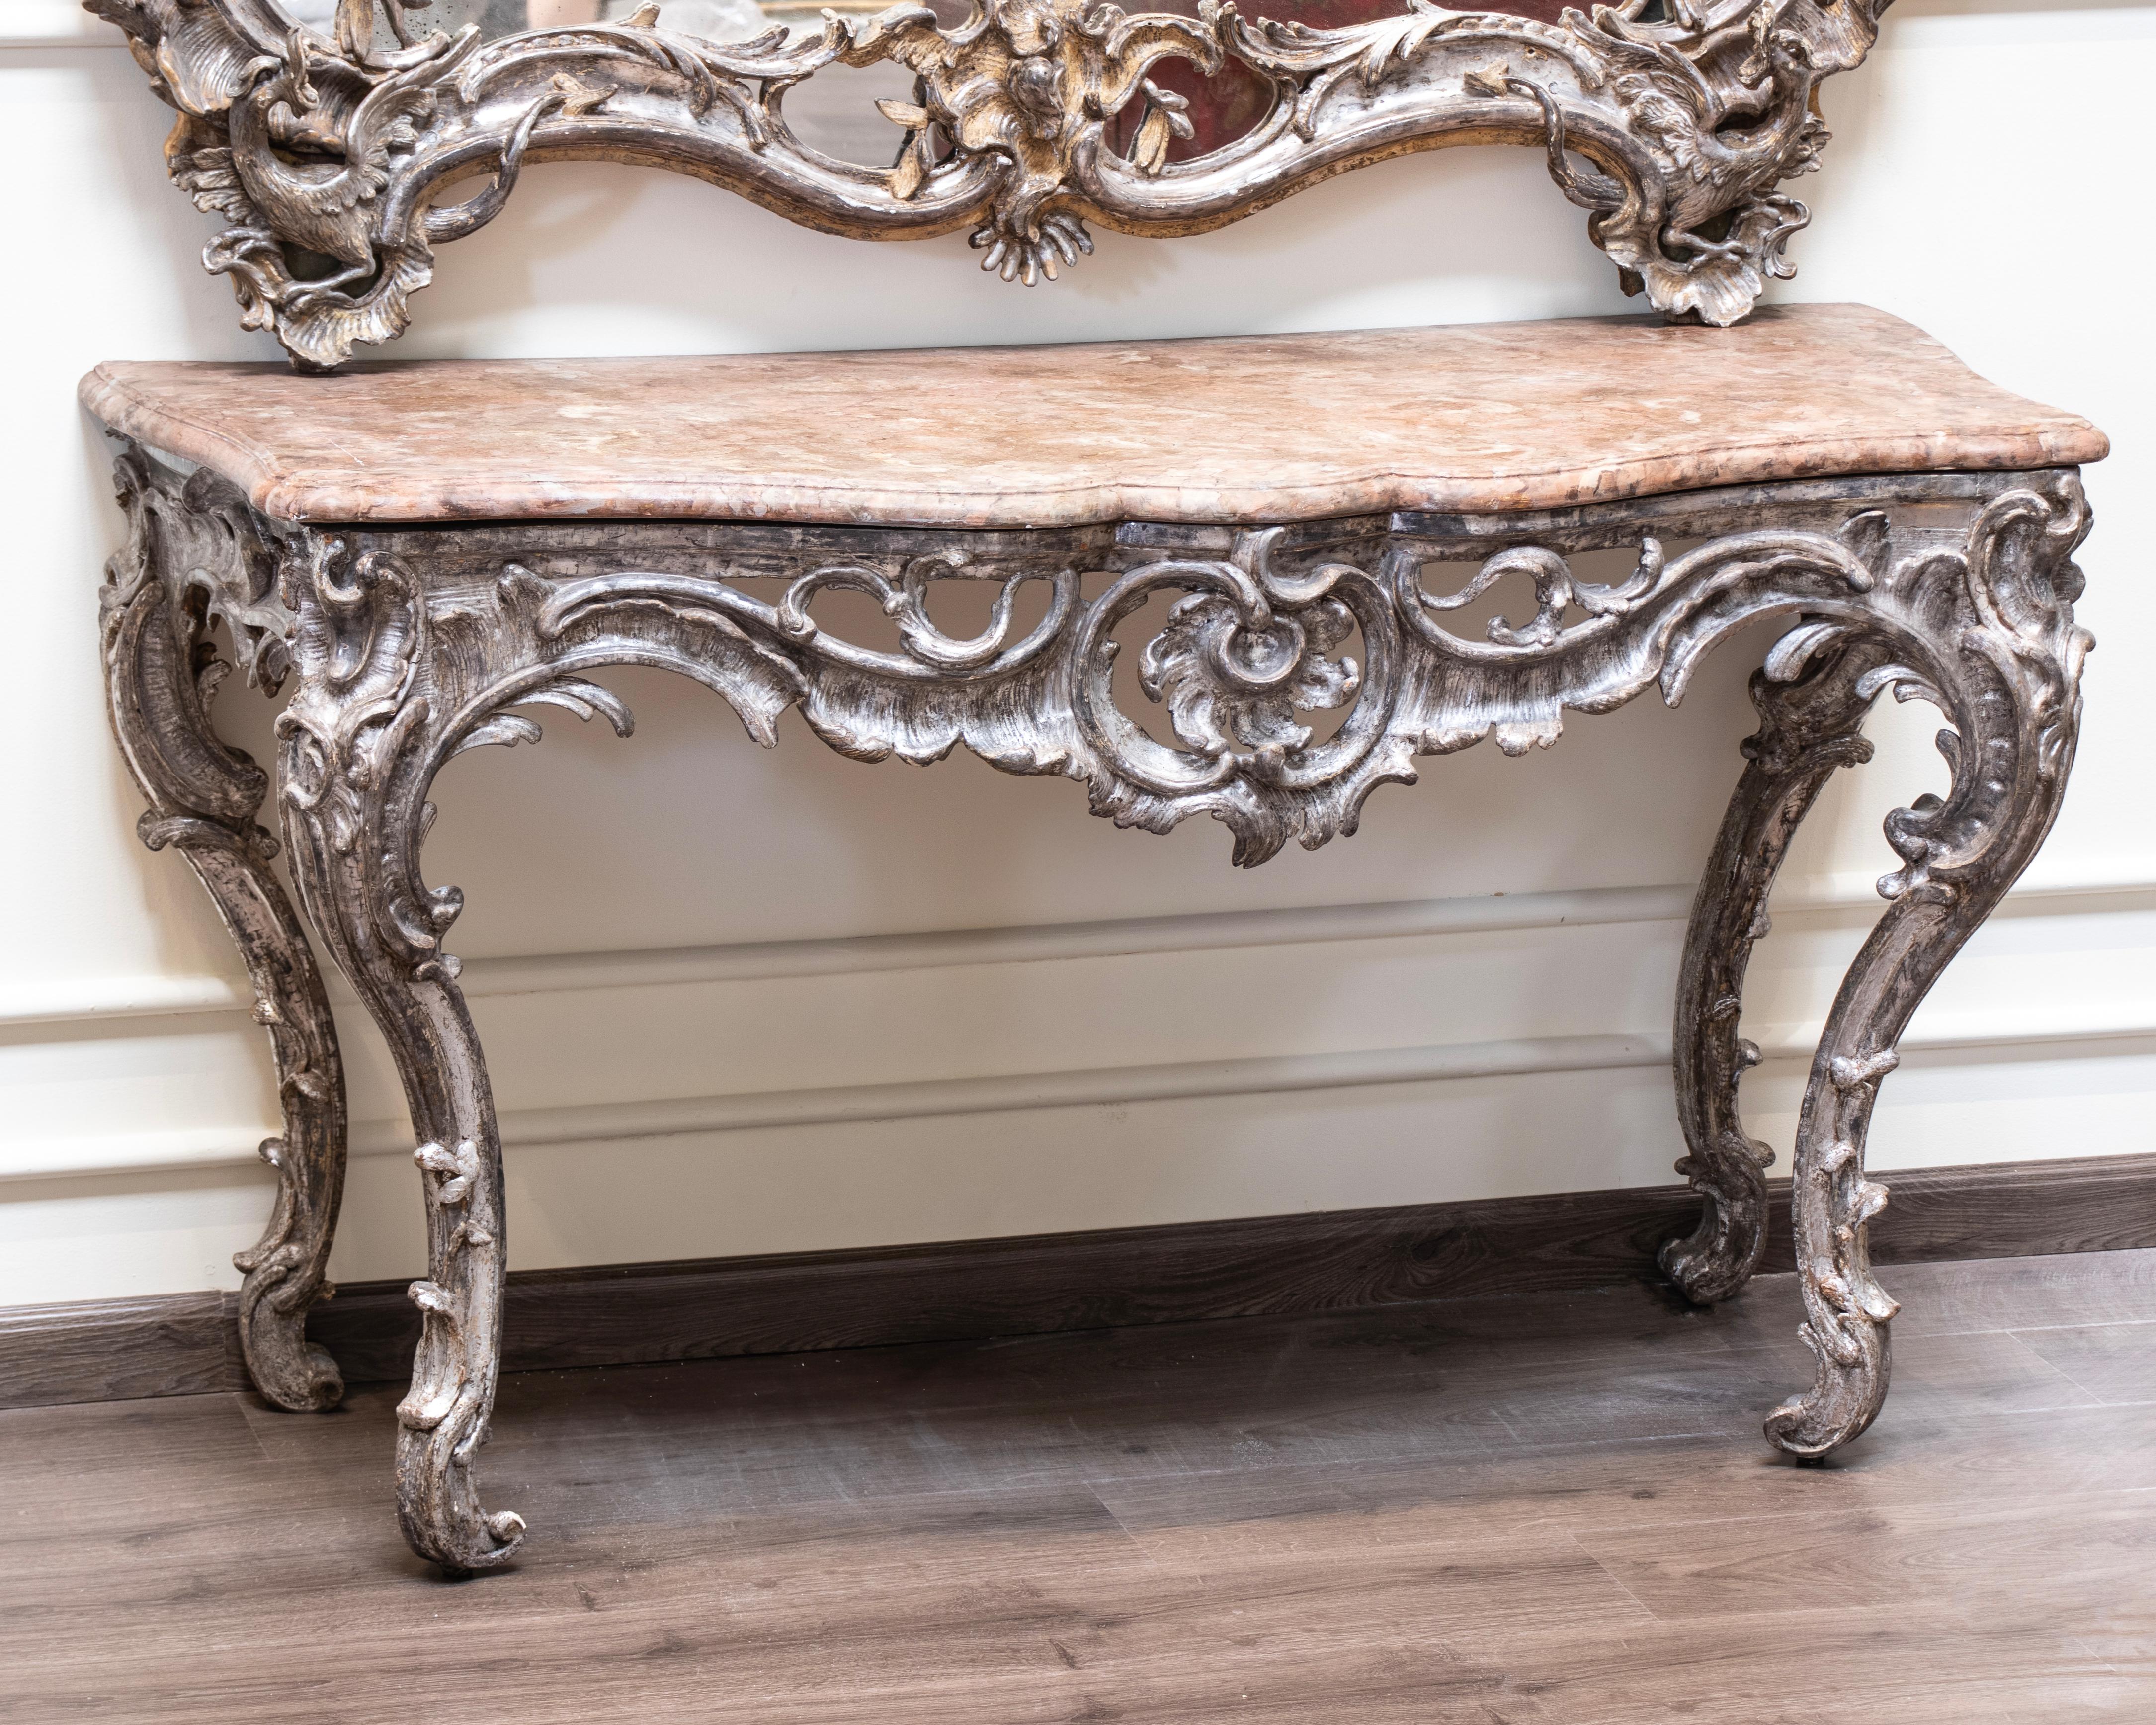 18th Century Mid-18th century Silvered Wood Carved Console in Rococo Style For Sale